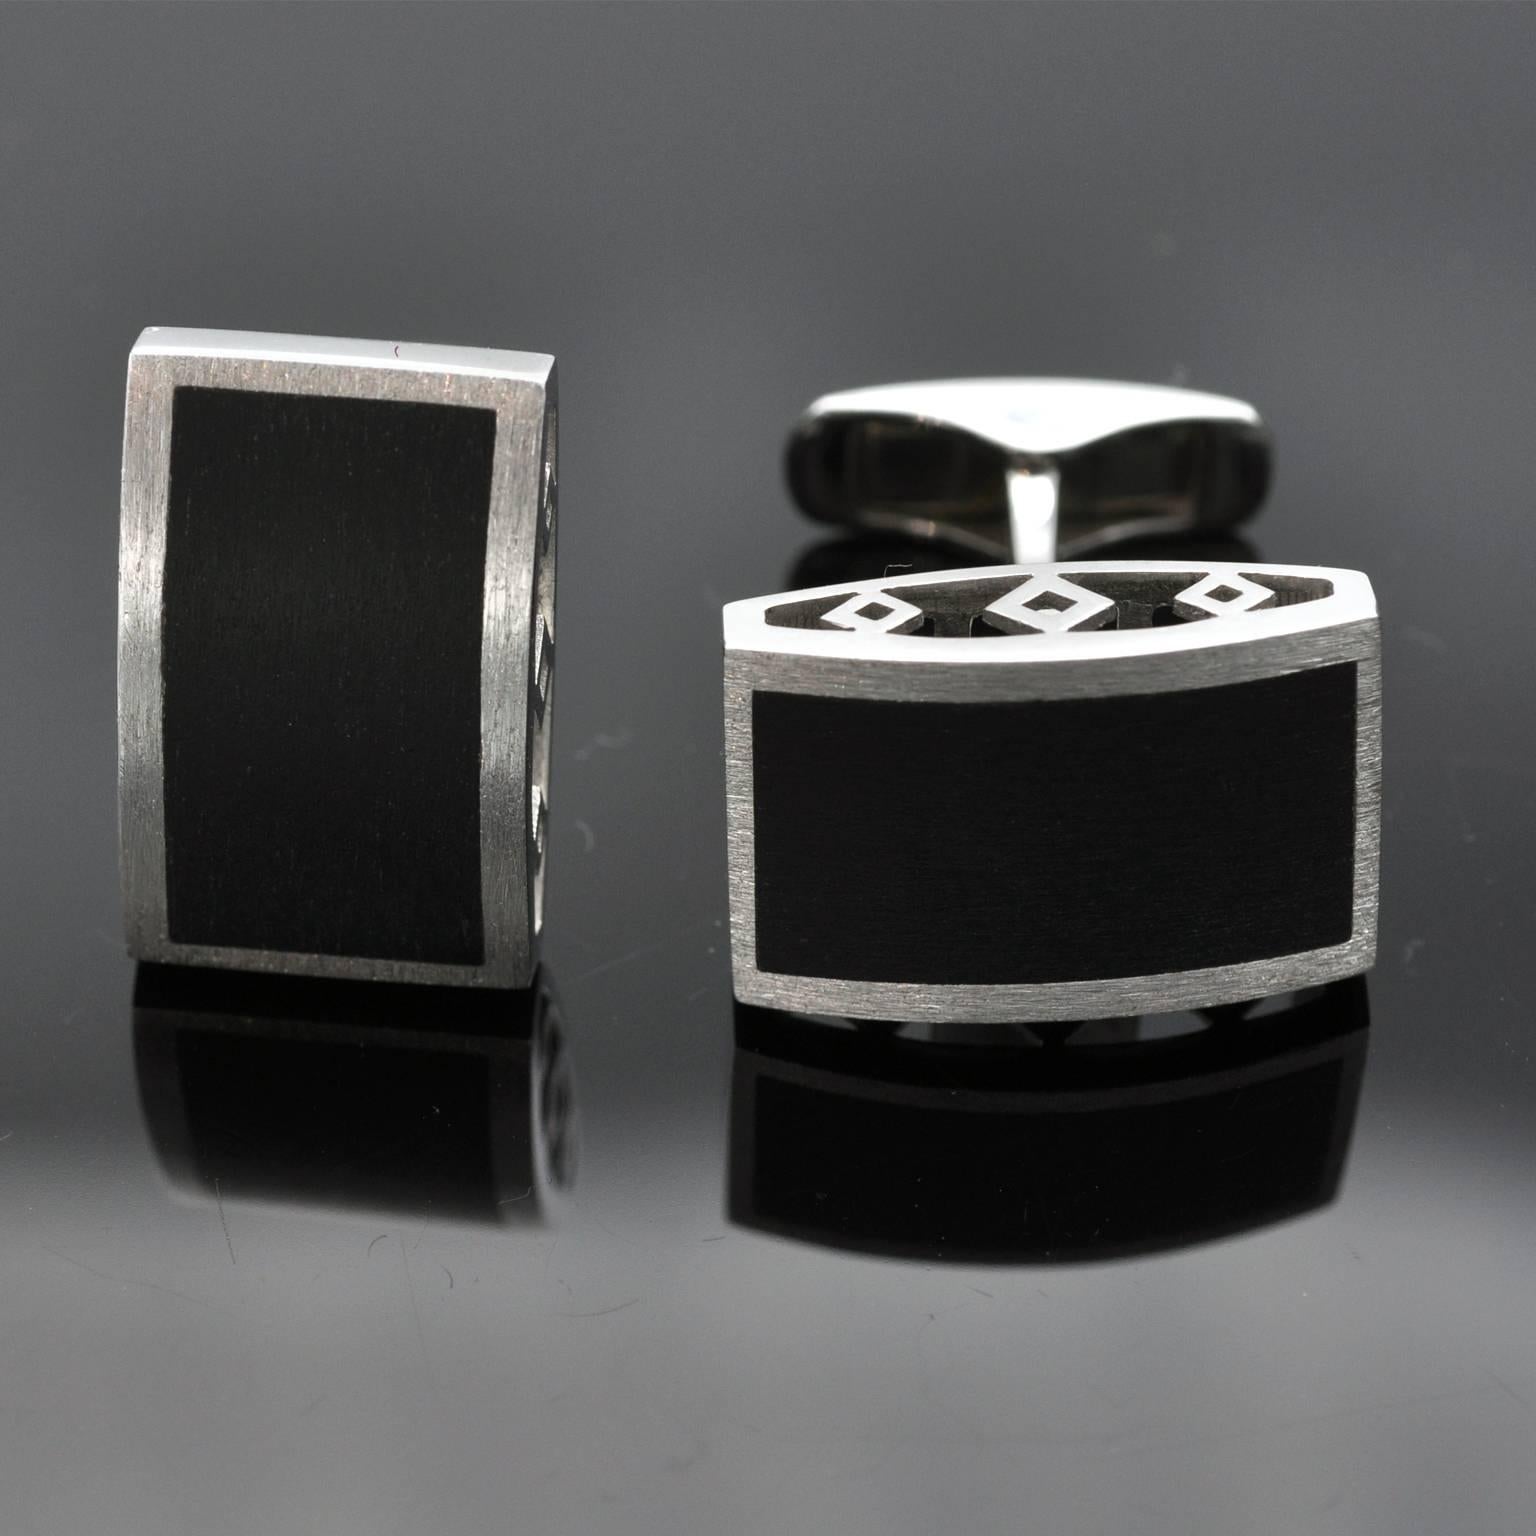 Modern cufflinks  . Rectangular onyx perfectly fitted in 18 kt white gold . the surface is curved and textured. Very pure design indeed.
French hallmark stamp